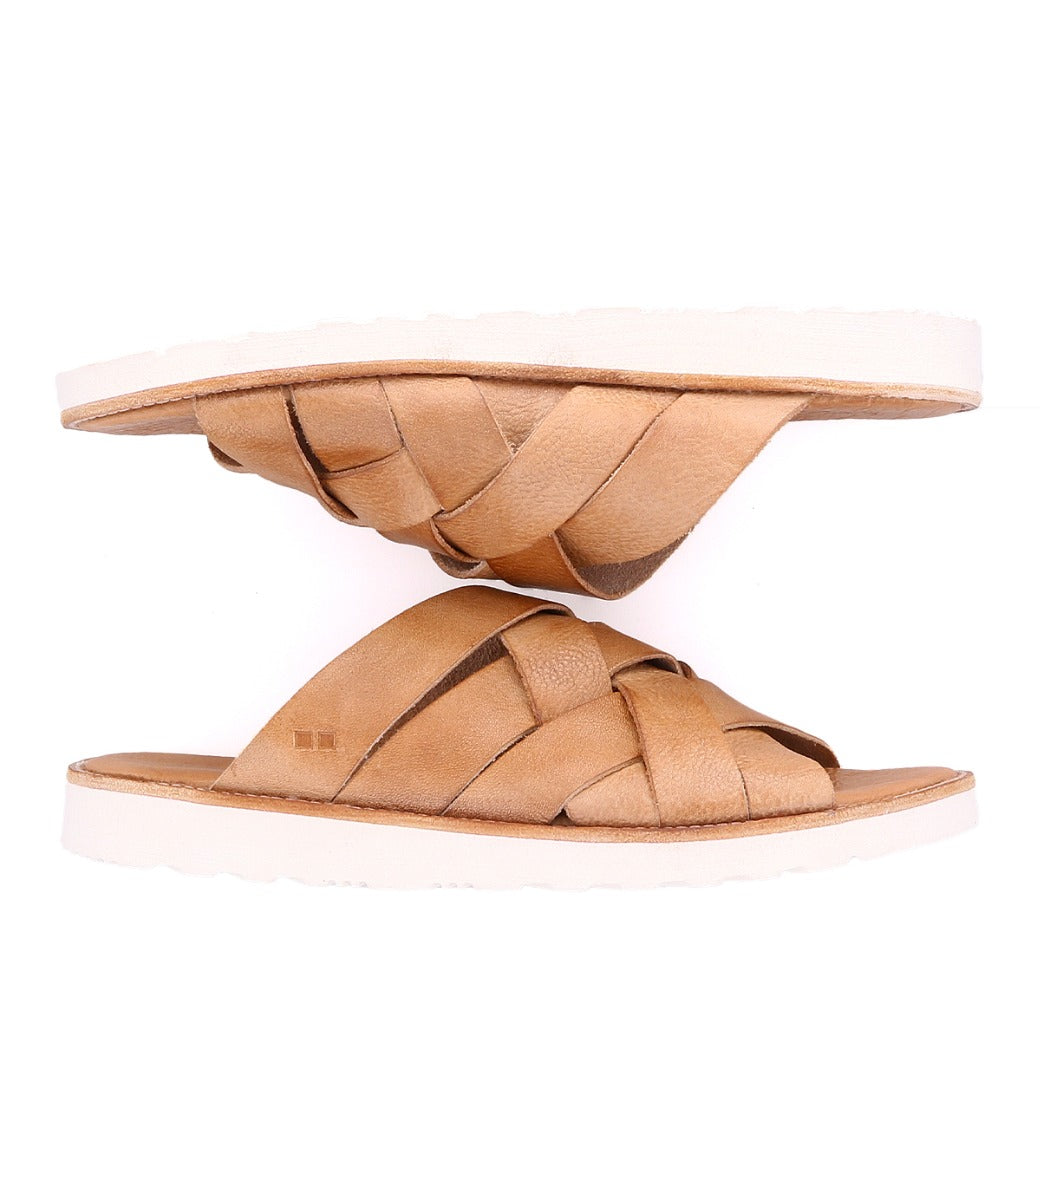 A pair of Bed Stu Abraham Light leather woven slide sandals displayed against a white background.